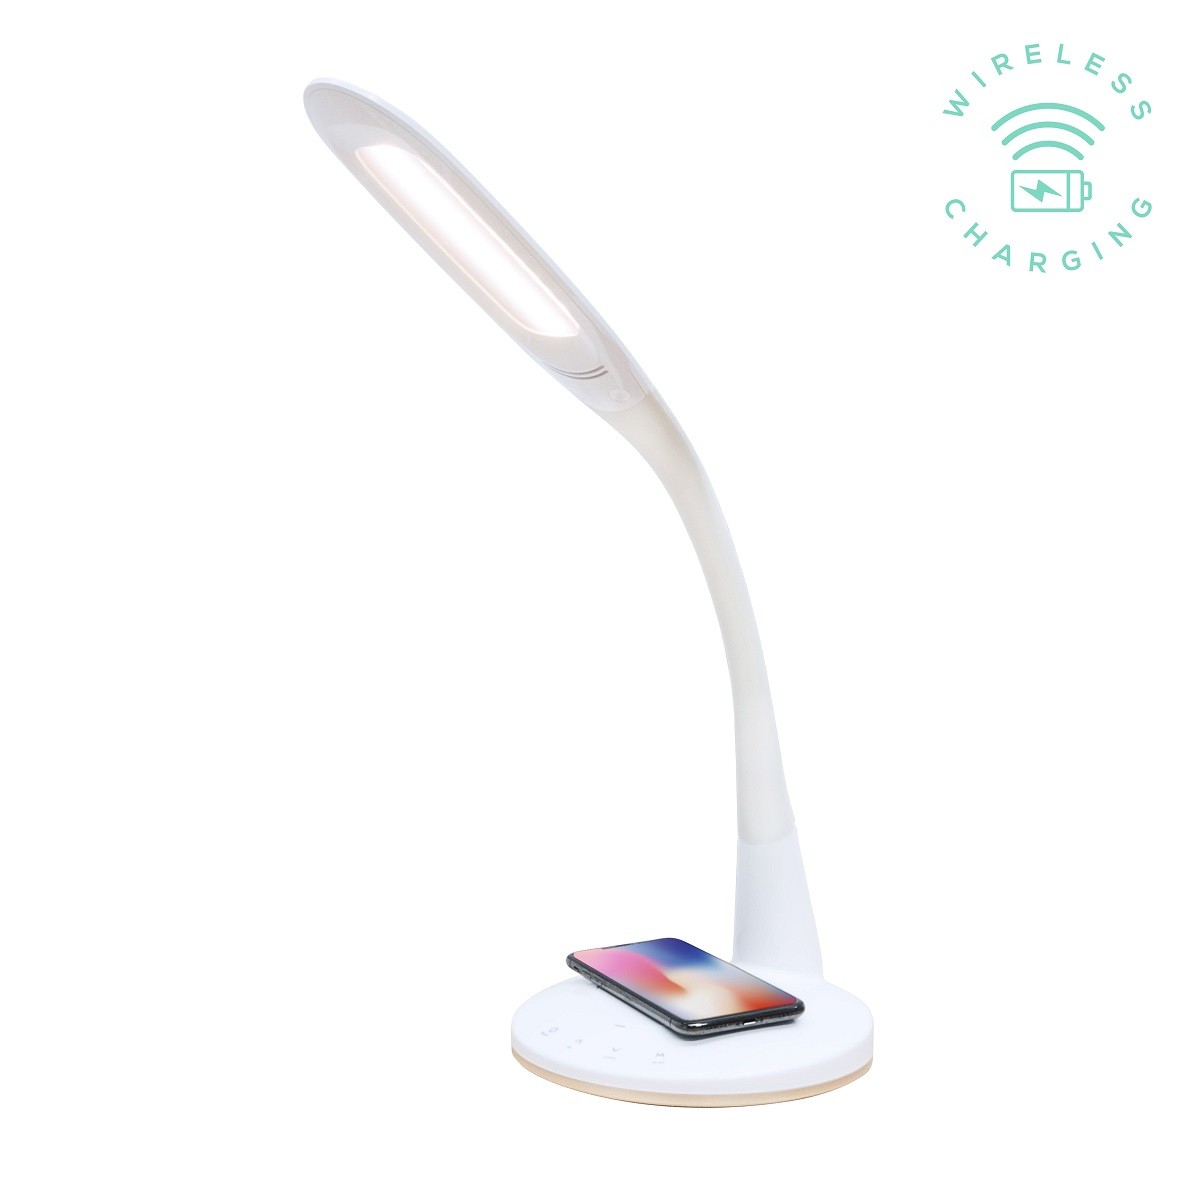 mbeat® actiVIVA LED Desk Lamp with Wireless Changer - LED illumination Switches/Warm Cool Modes/Rubberized Flexible Neck/Touch Sensitive